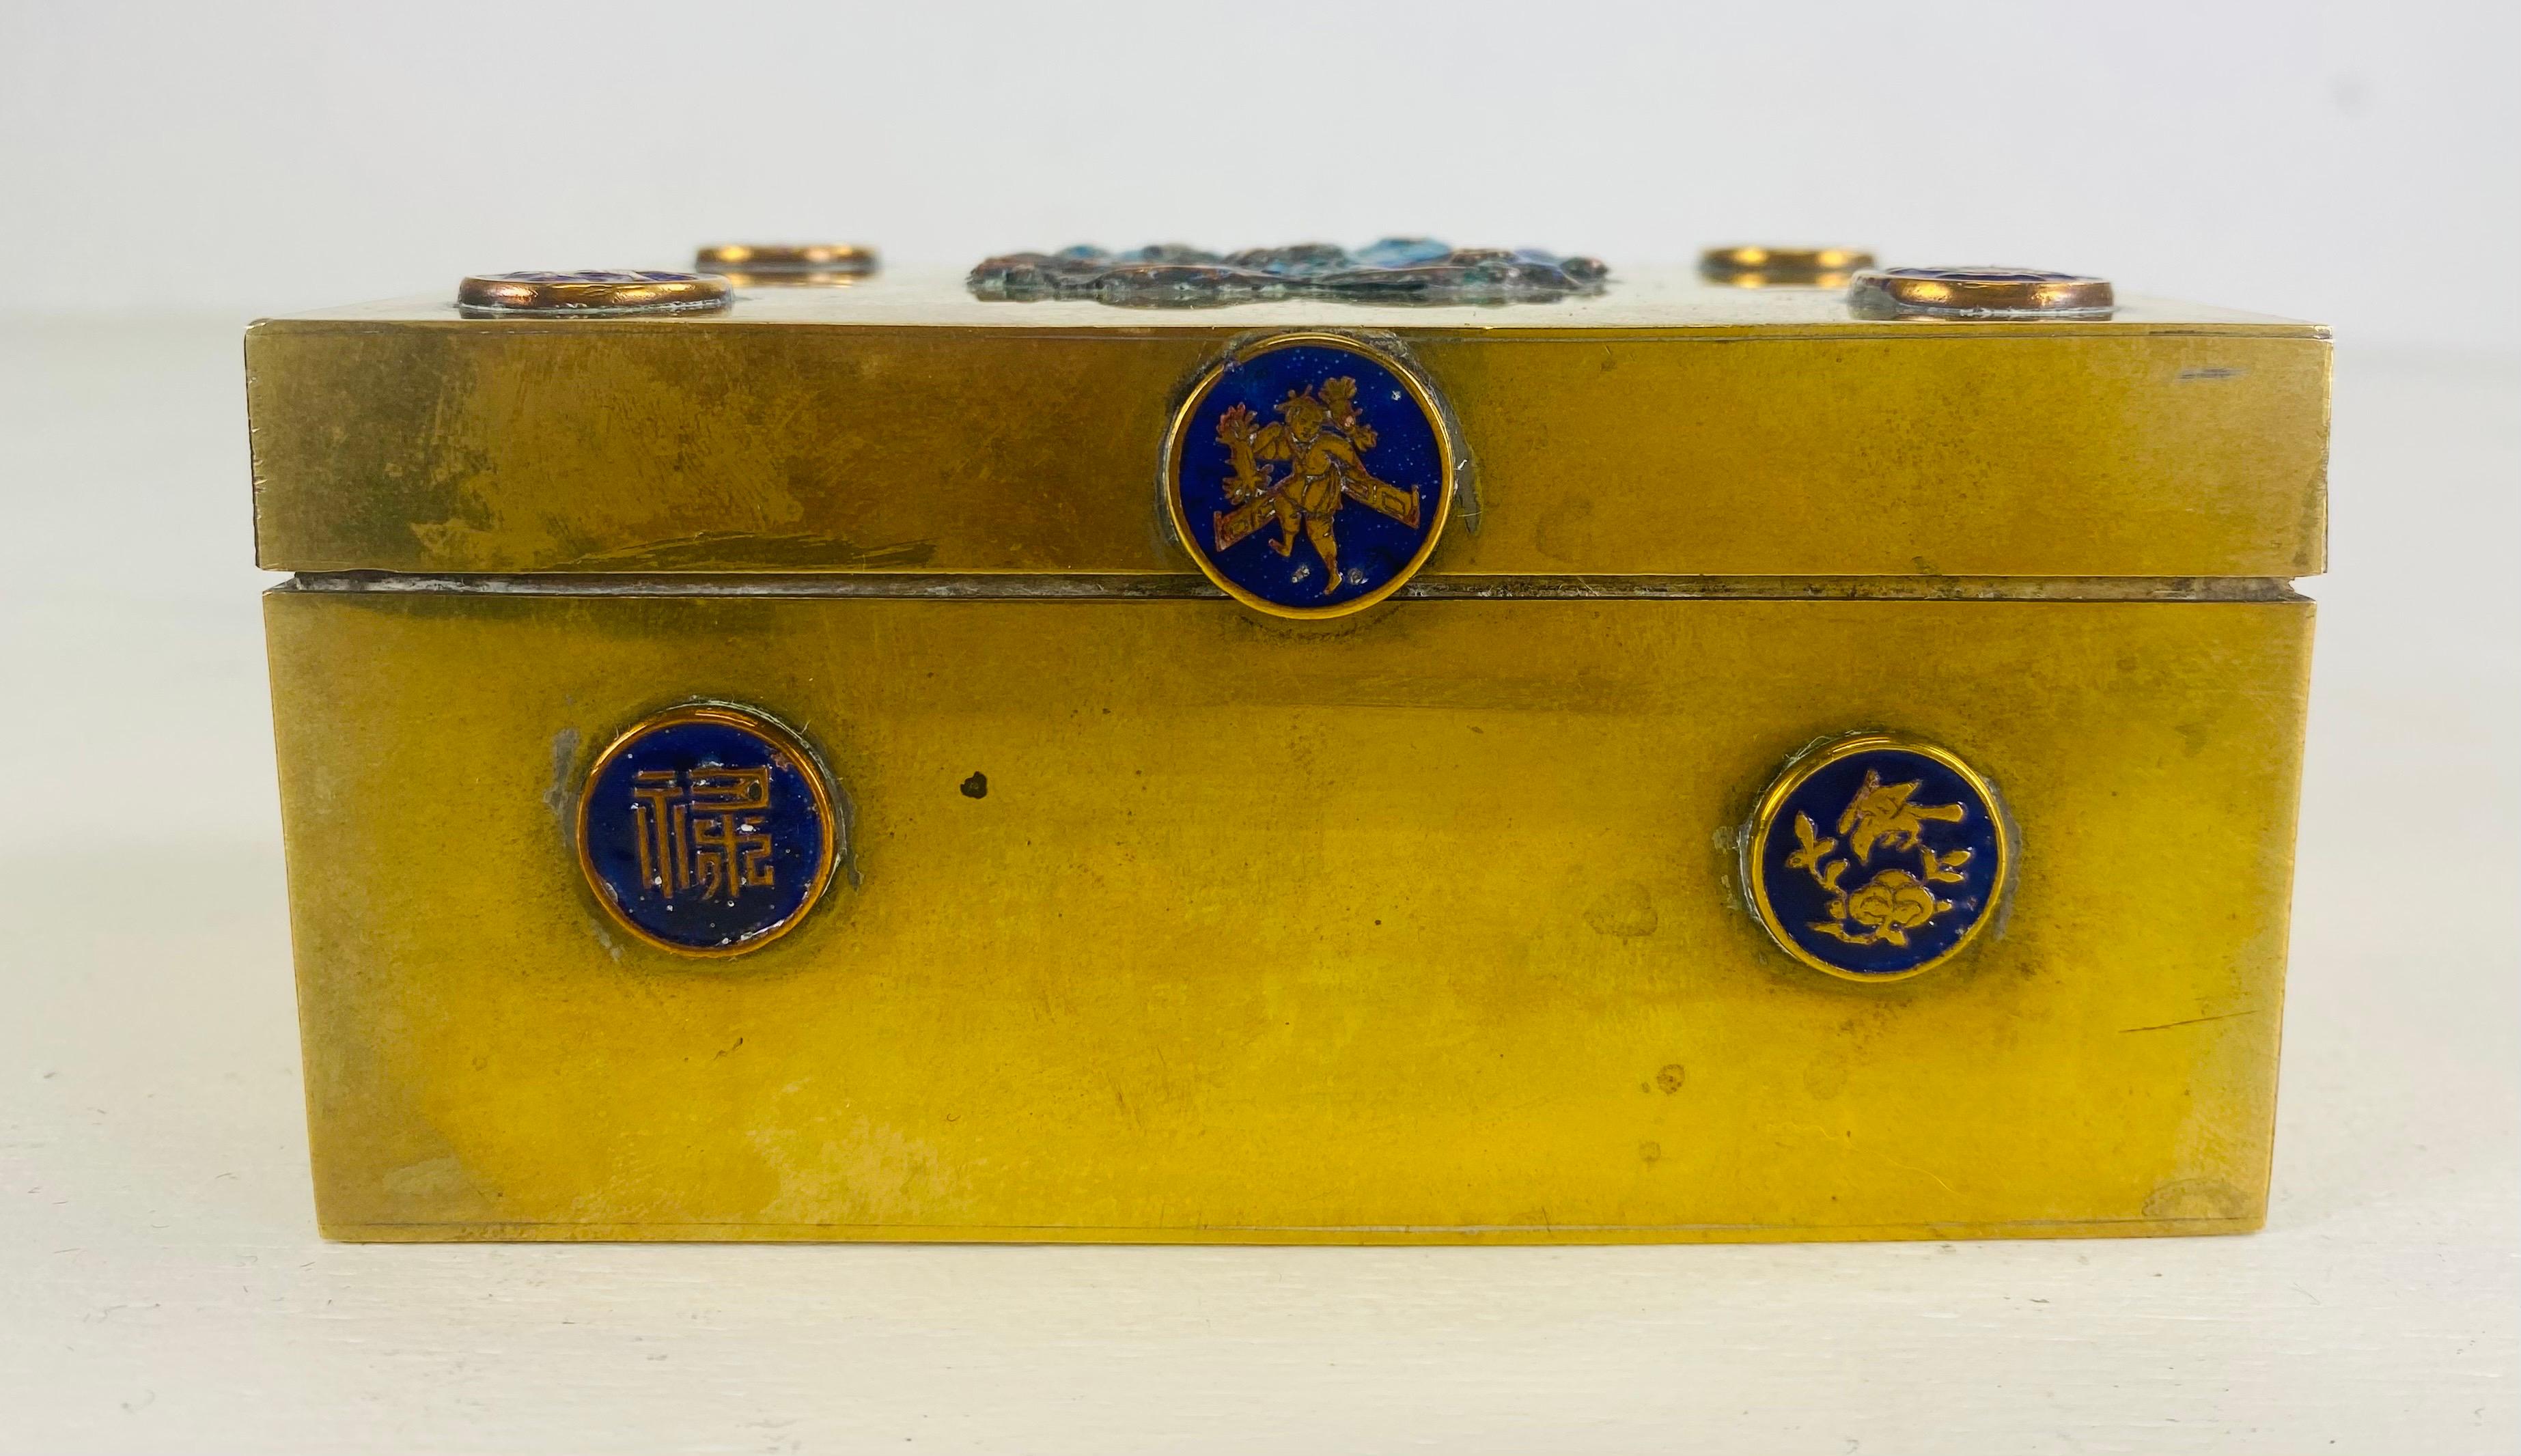 This is a vintage Chinese export solid brass and enamel trinket box. This solid brass box has four medallions on the top and medallions on each side of the box. The top of the box features one large center medallion that has blue enamel. The box was